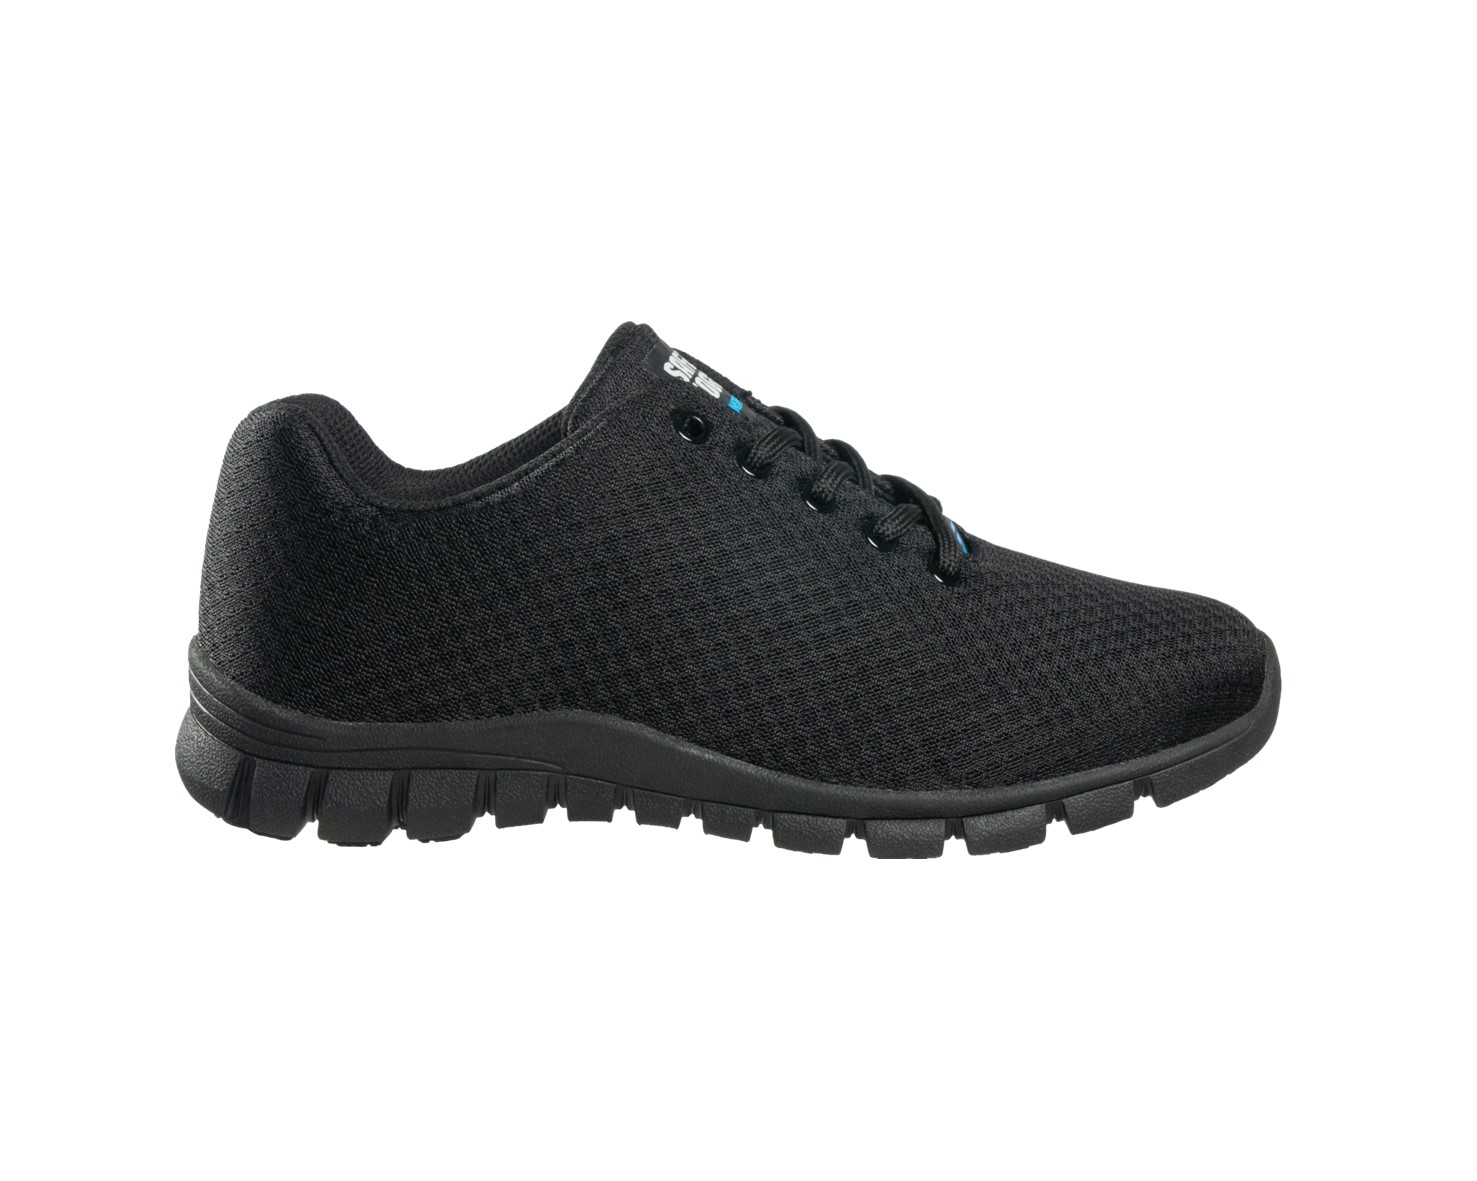 'Kassie' Unisex Professional Shoes, Comfortable & Breathable